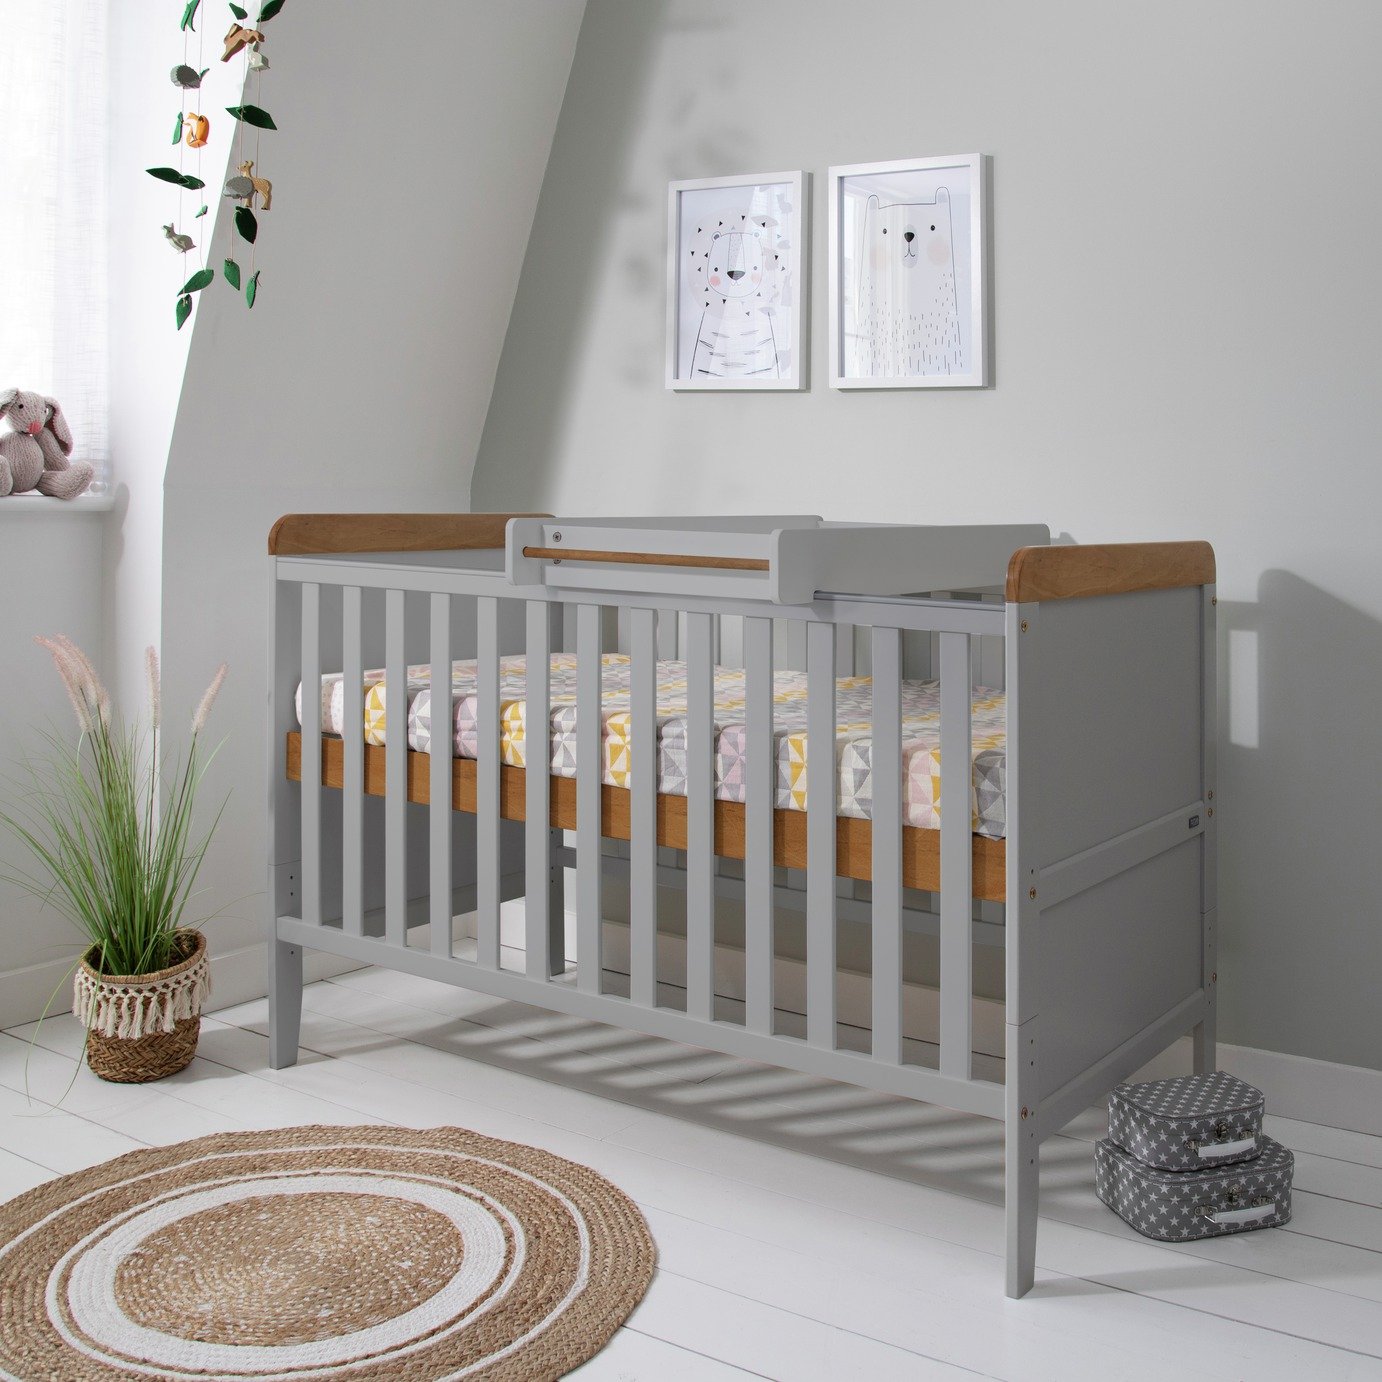 Tutti Bambini Rio Cot Bed with Mattress and Changer Review